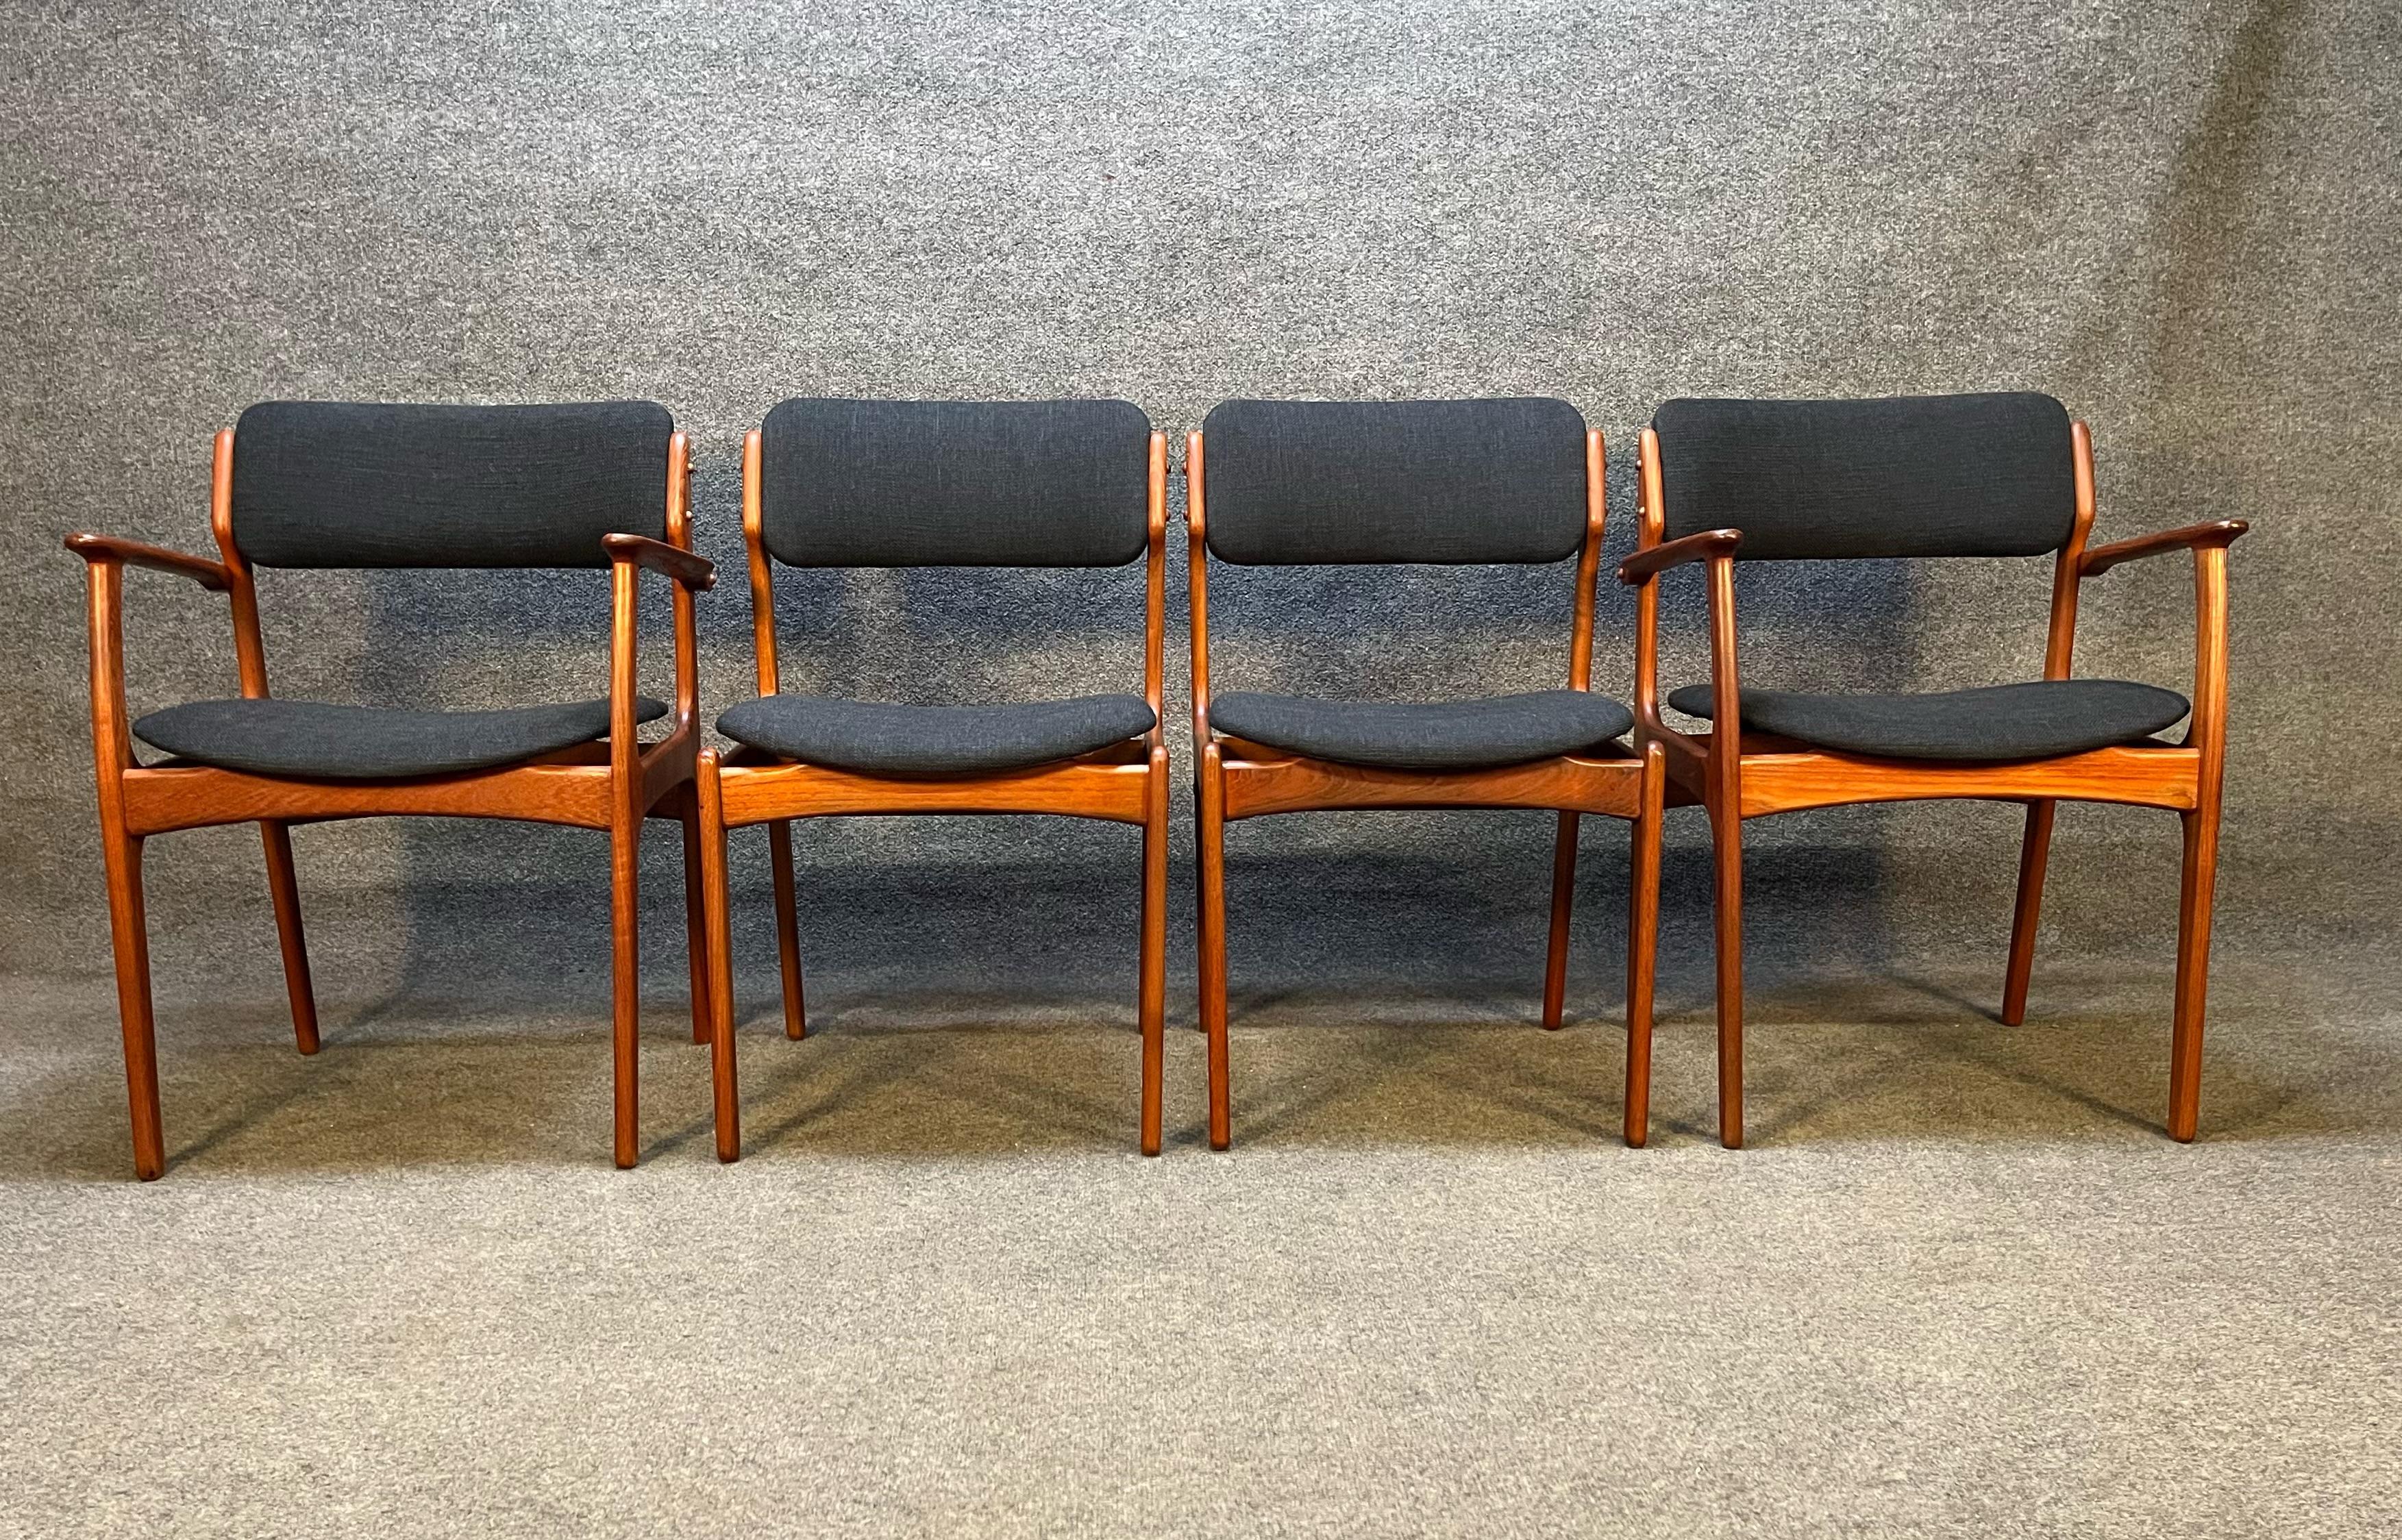 Here's is an amazing set of 4 of the quintessential Danish teak dining chairs designed by Erik Buch Model 49 and 50. These chairs have been completed refinished and have brand new charcoal black fabric and foam. This set comes with 2 captains chairs